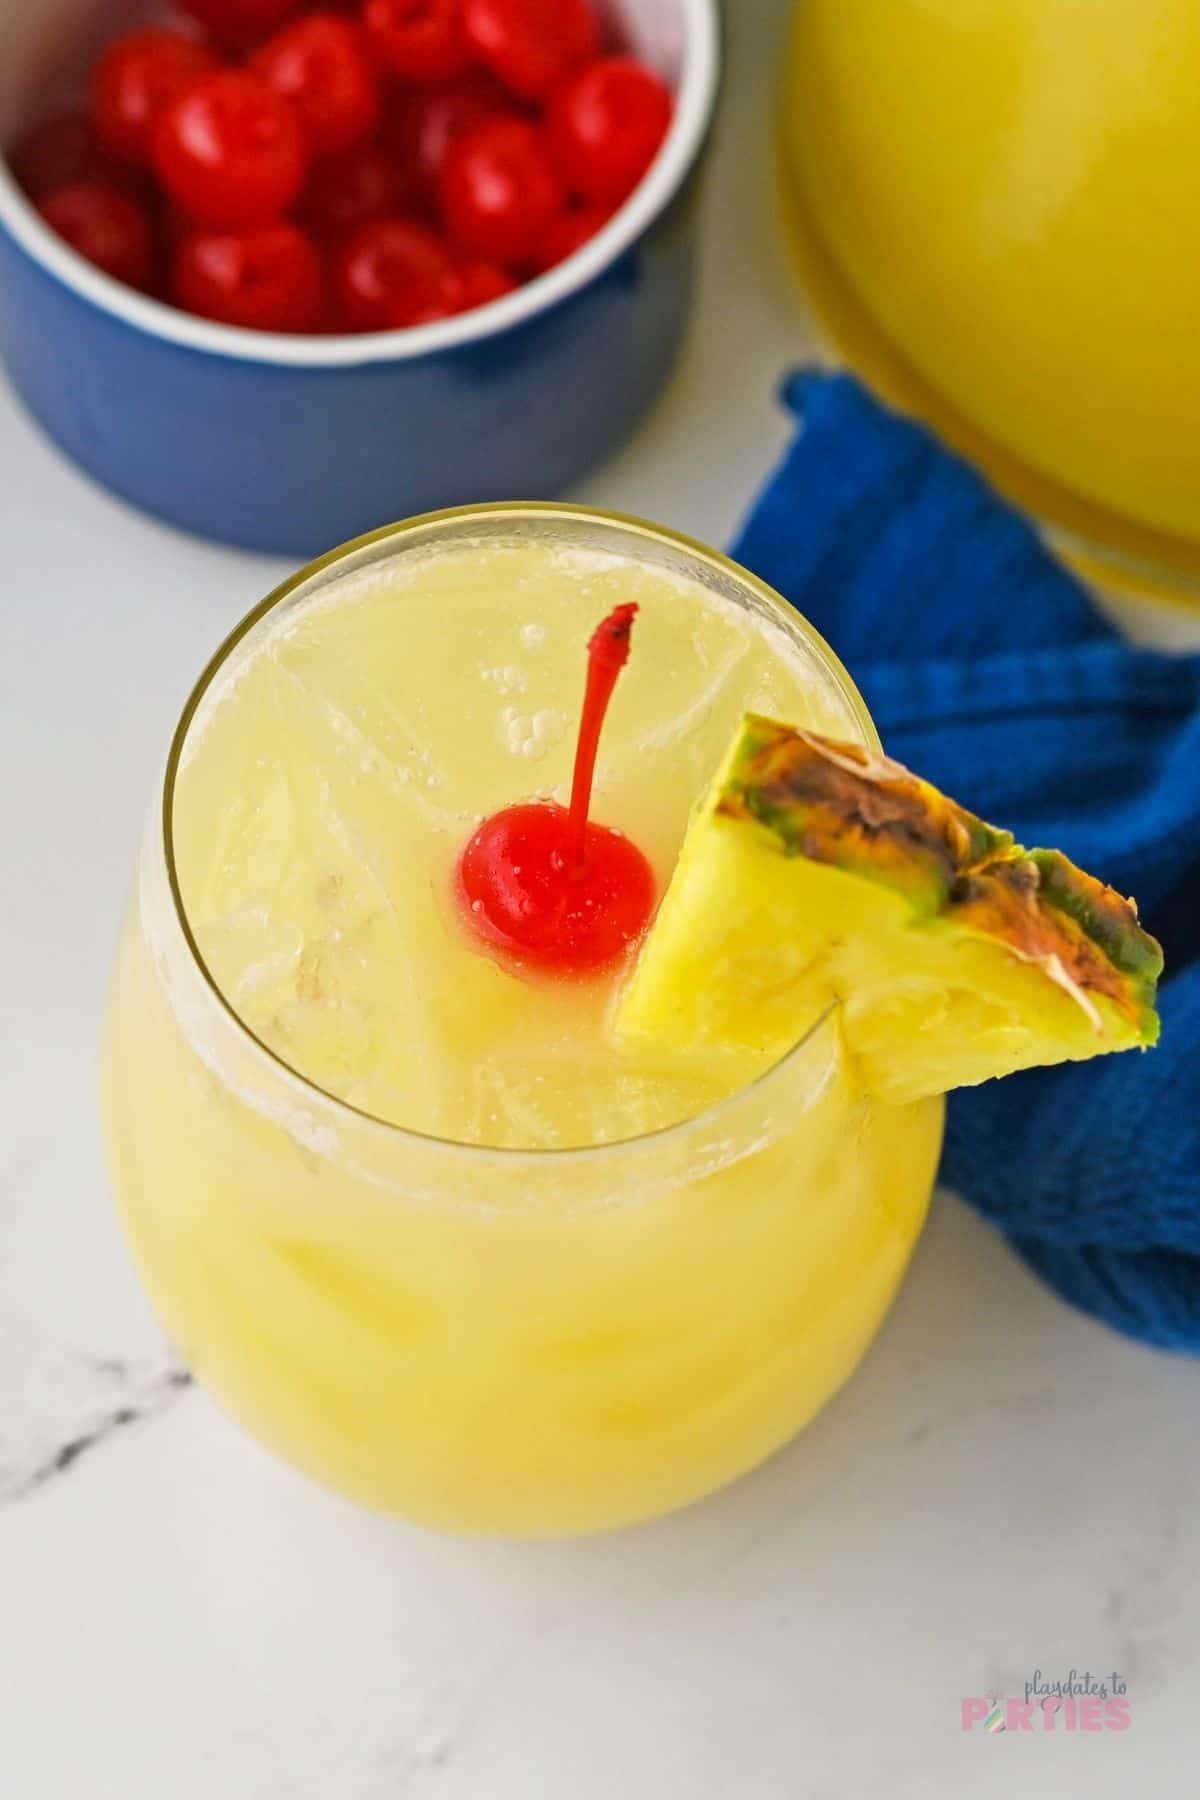 A glass filled with pina colada party punch and ice cubes.